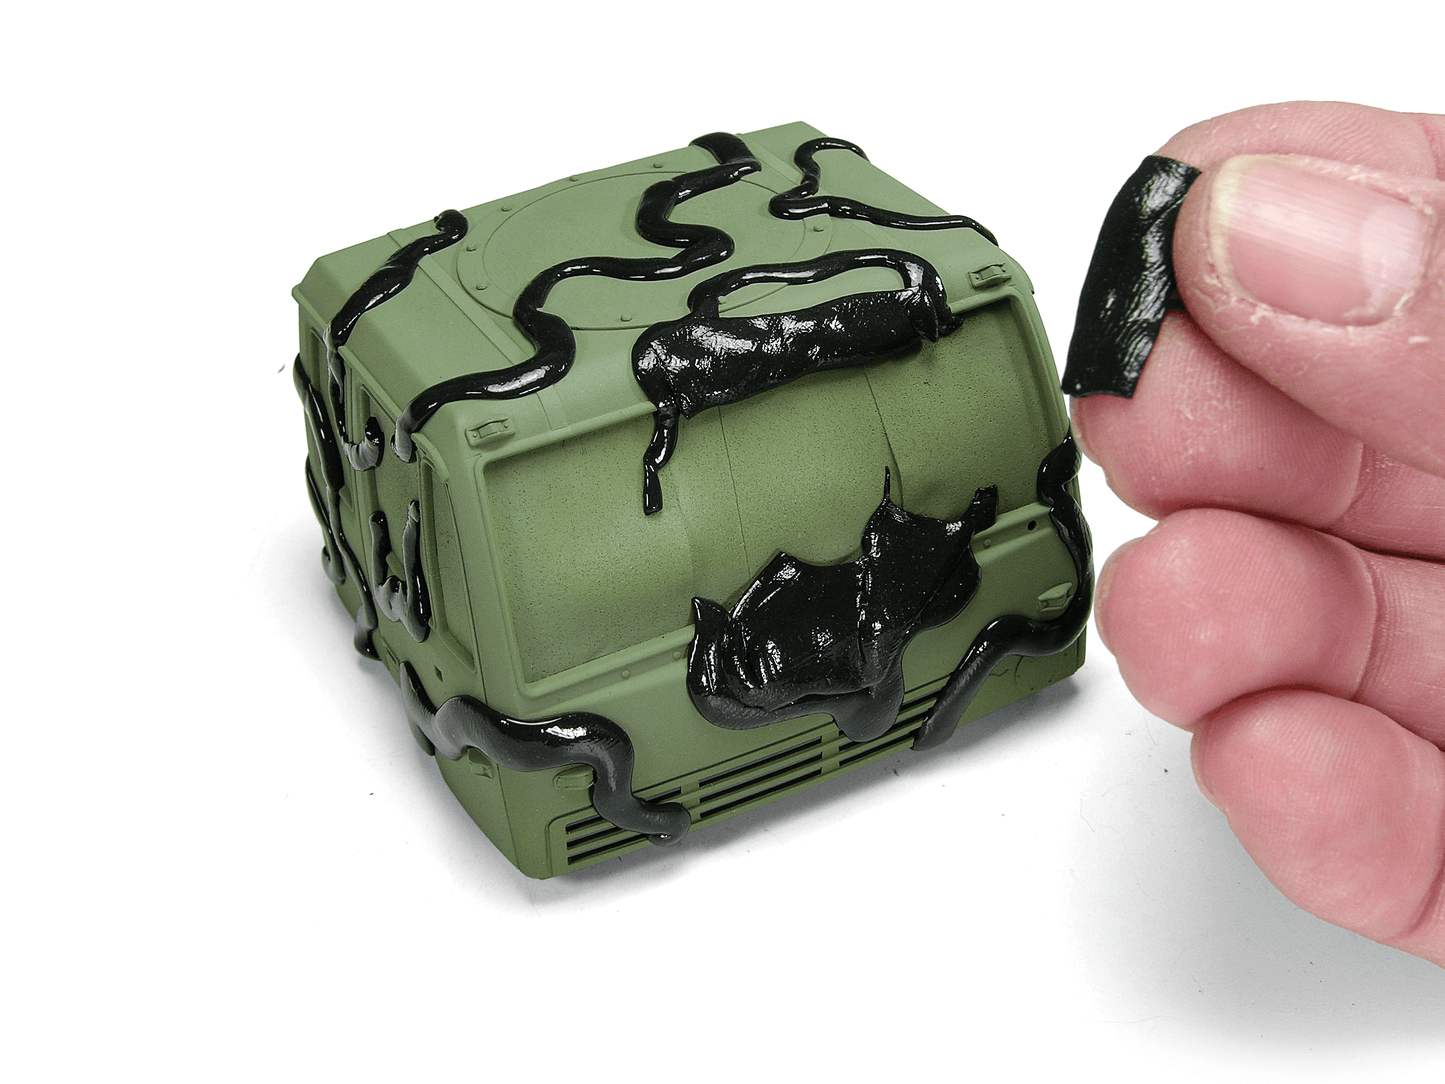 Camouflage elastic putty